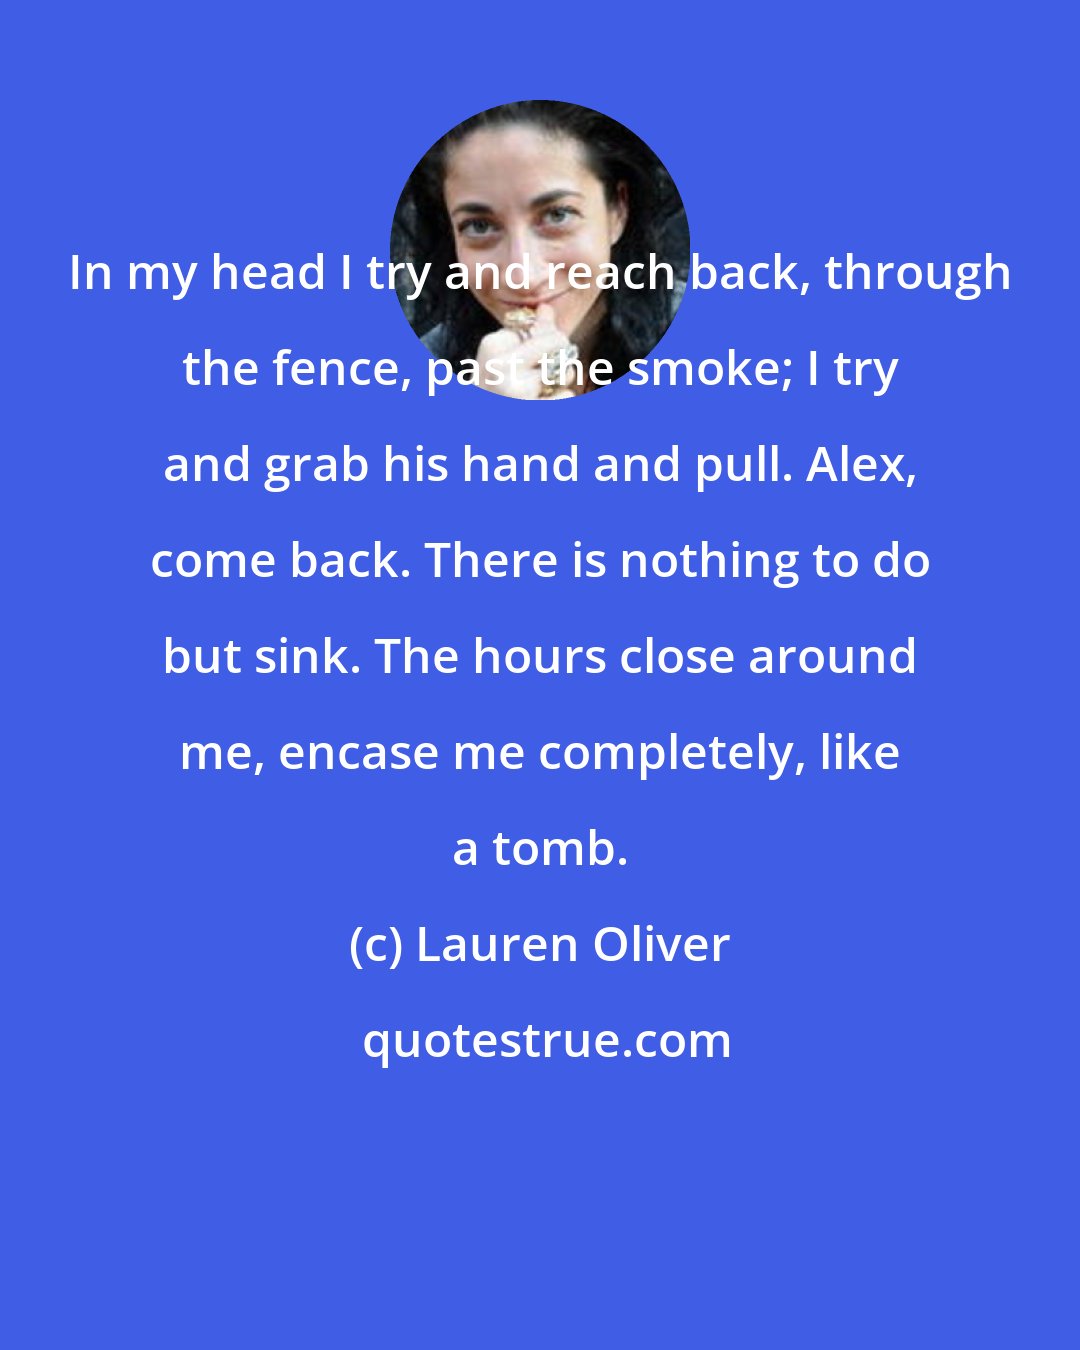 Lauren Oliver: In my head I try and reach back, through the fence, past the smoke; I try and grab his hand and pull. Alex, come back. There is nothing to do but sink. The hours close around me, encase me completely, like a tomb.